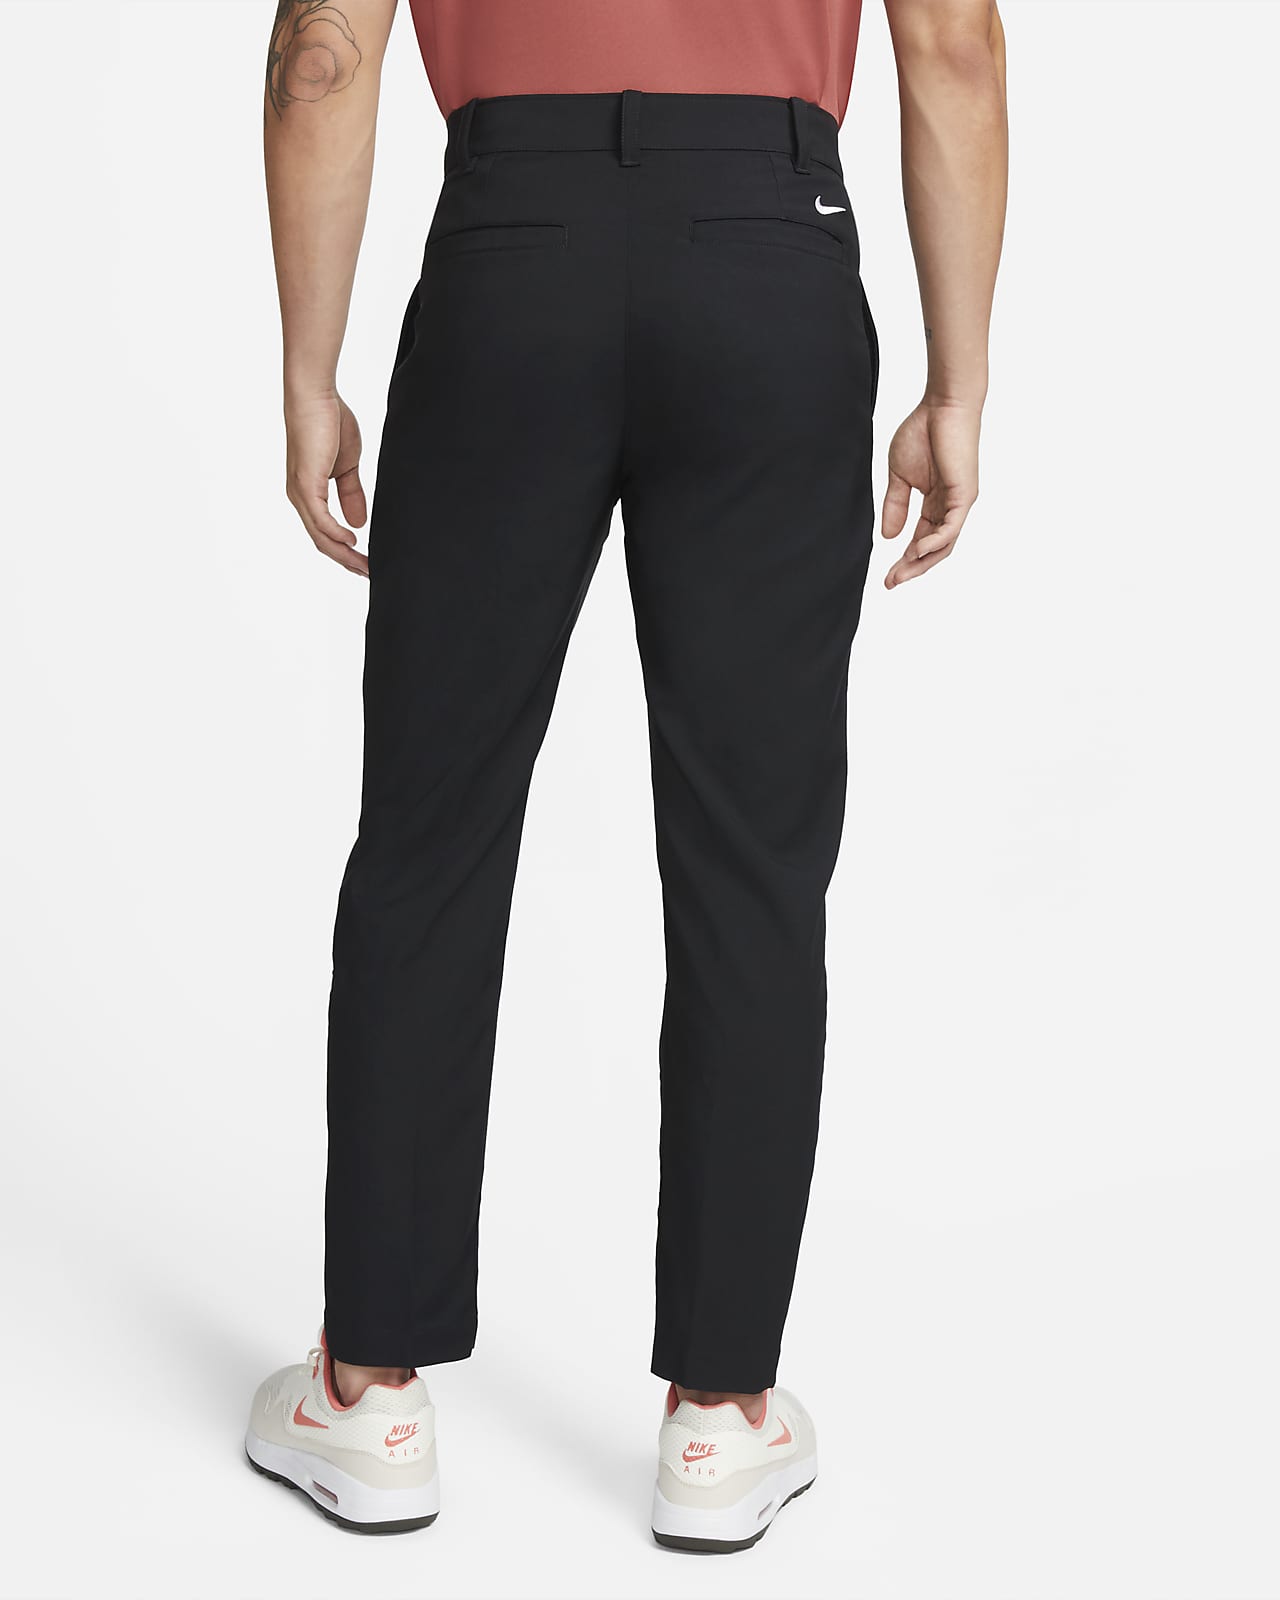 Under Armour EU Performance Trousers Grey - O'Dwyers Golf Store